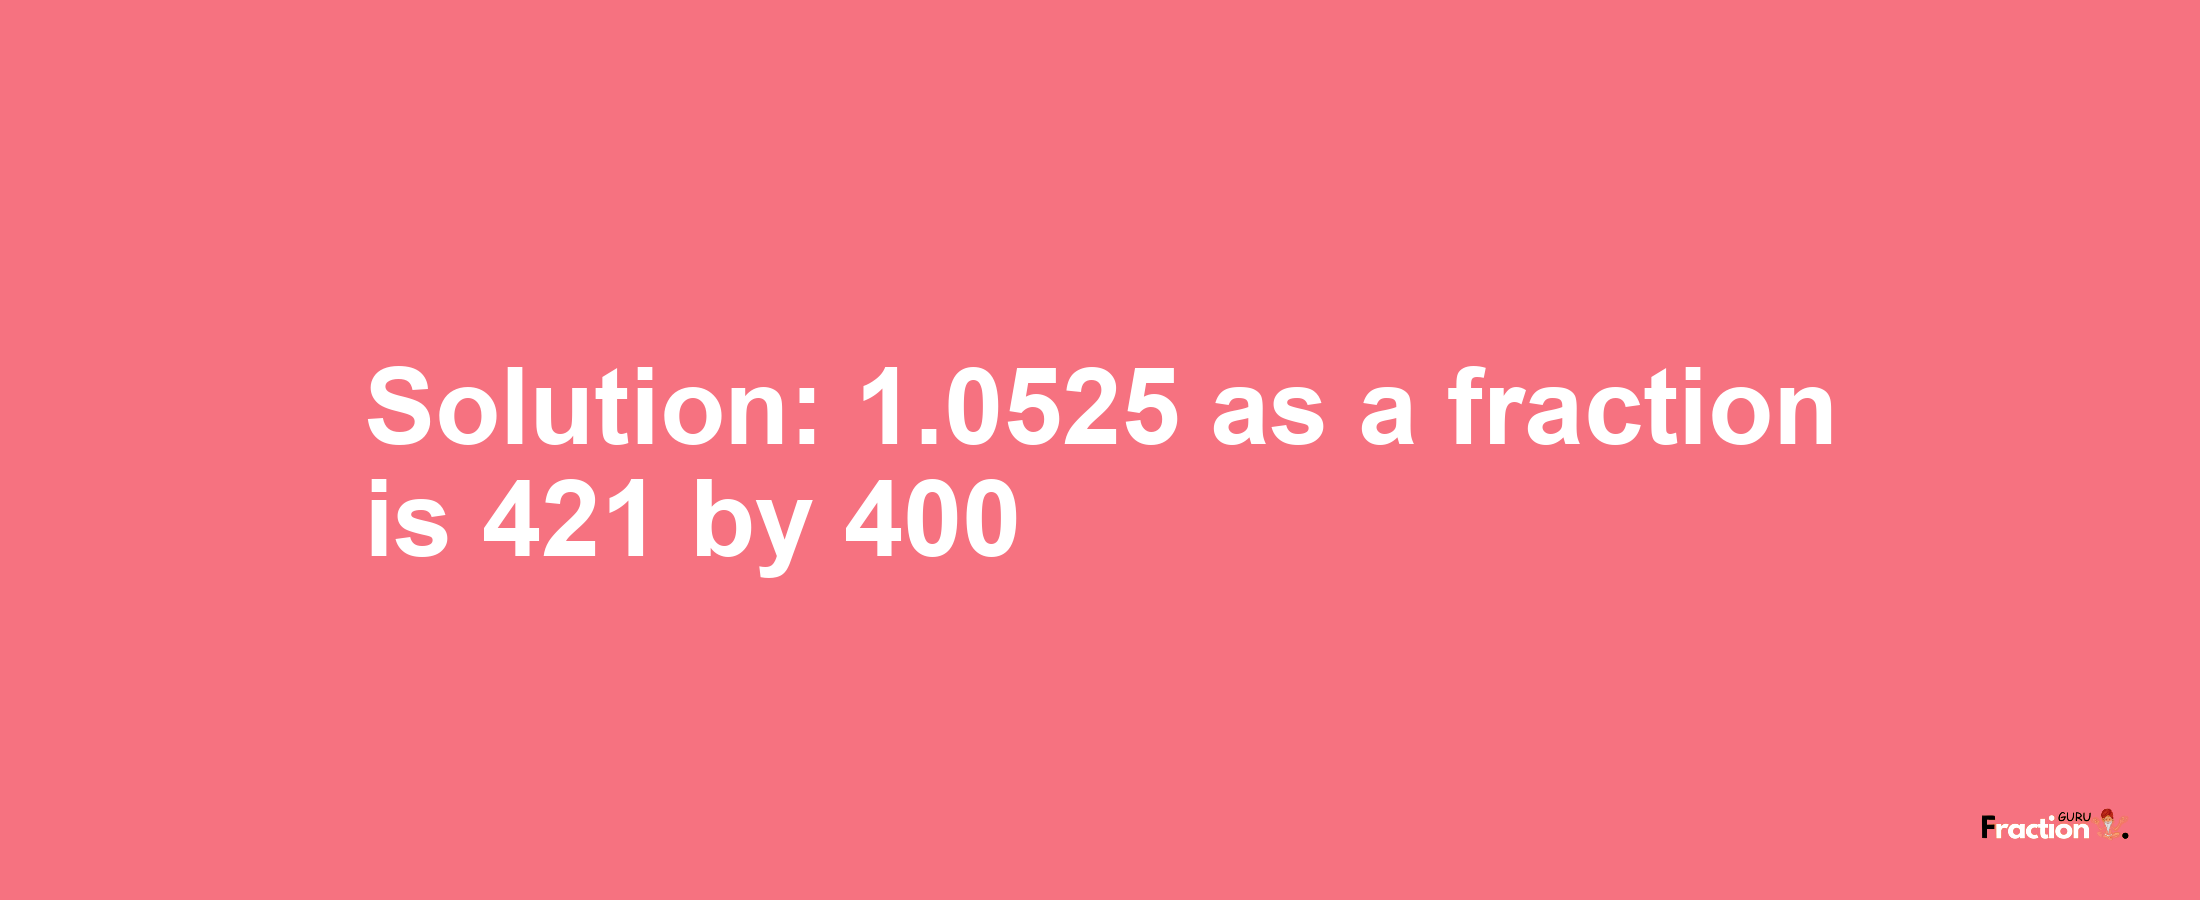 Solution:1.0525 as a fraction is 421/400